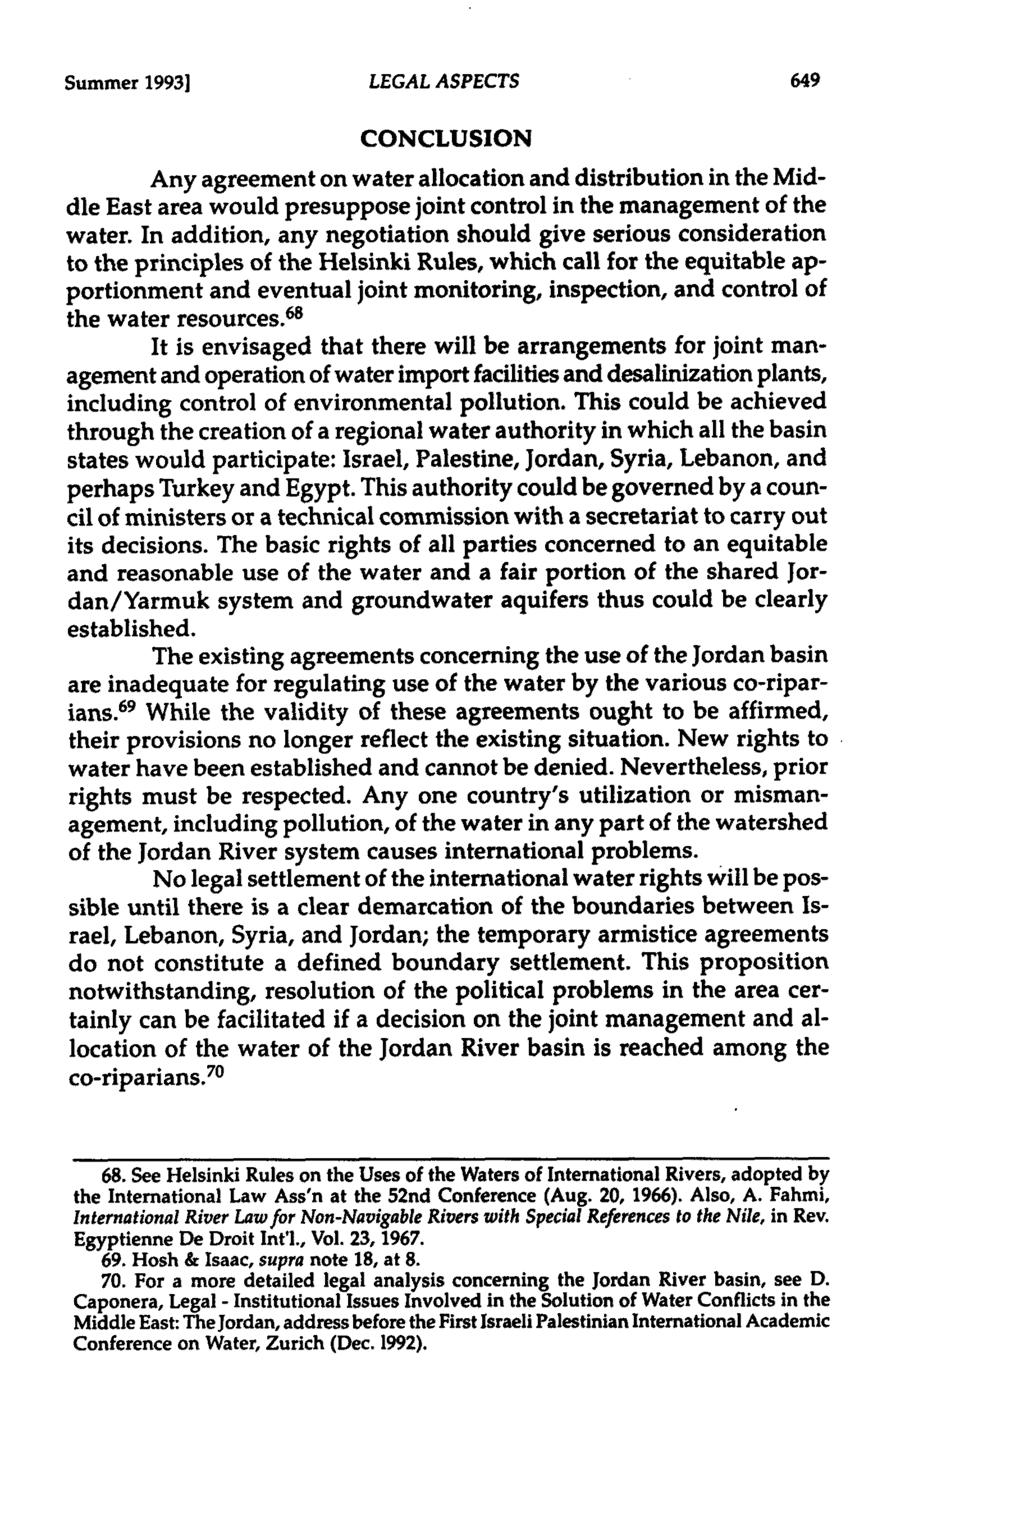 Summer 19931 CONCLUSION Any agreement on water allocation and distribution in the Middle East area would presuppose joint control in the management of the water.